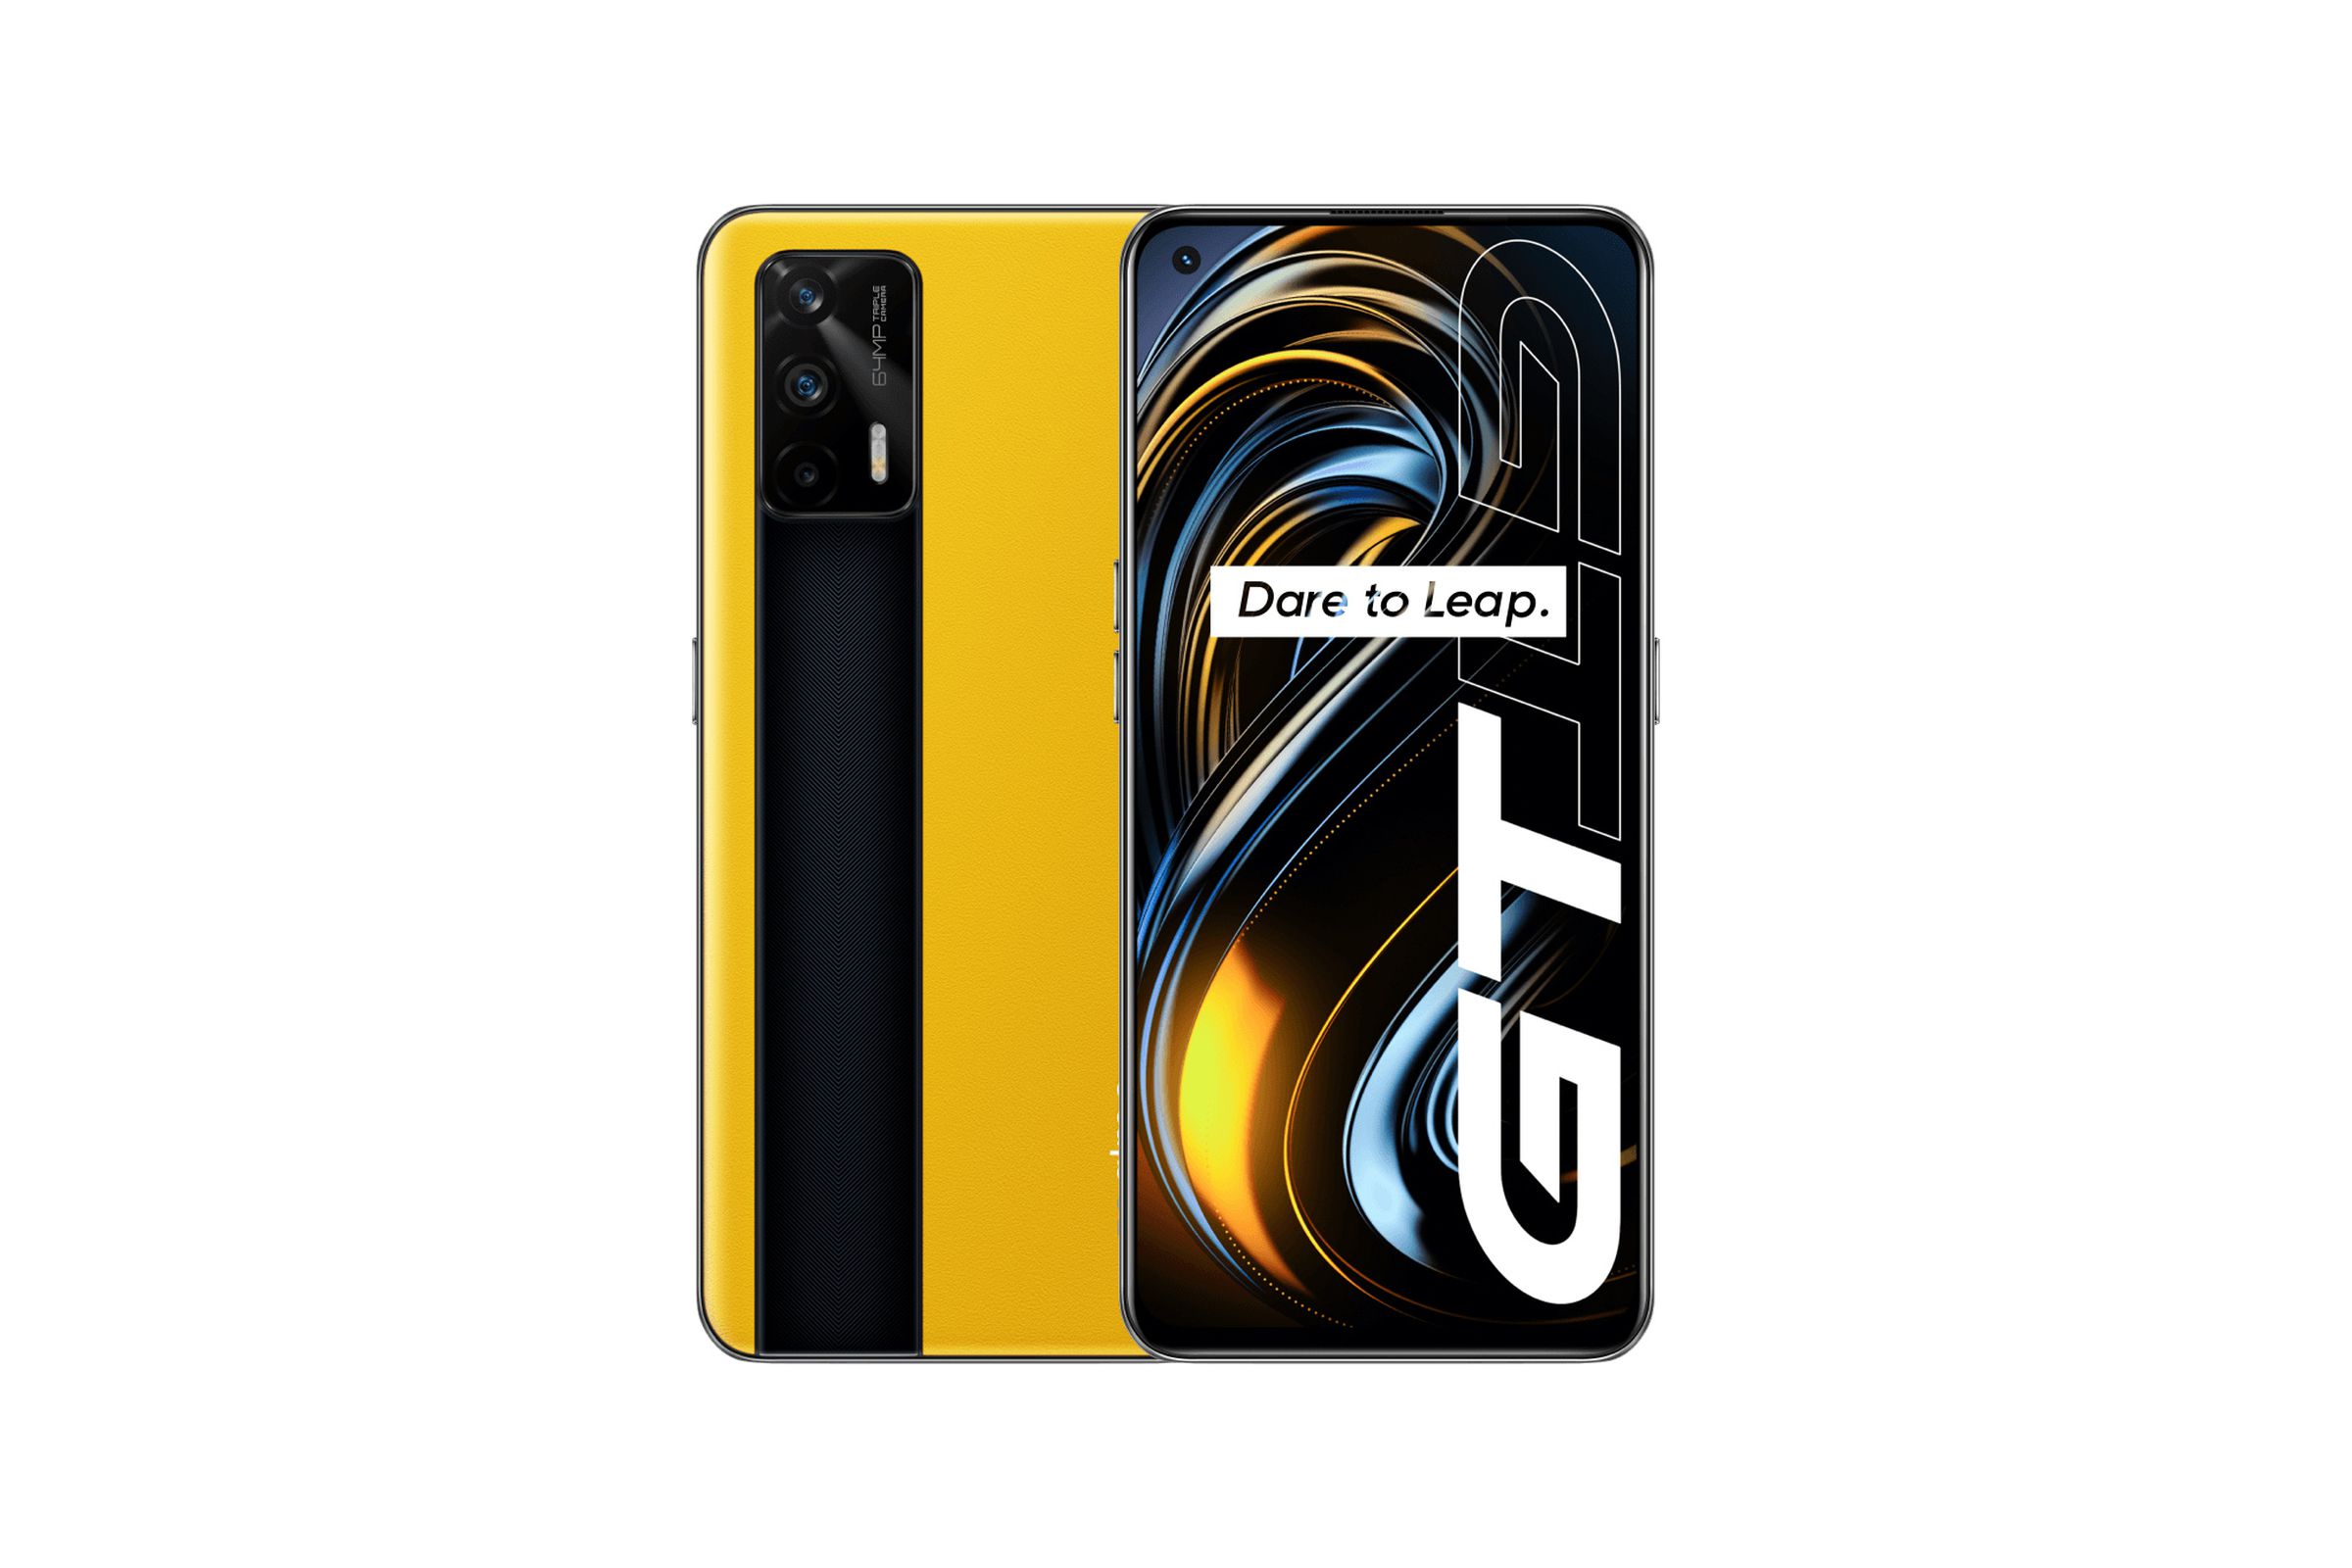 The GT 5G boasts flagship specs for much, much less.